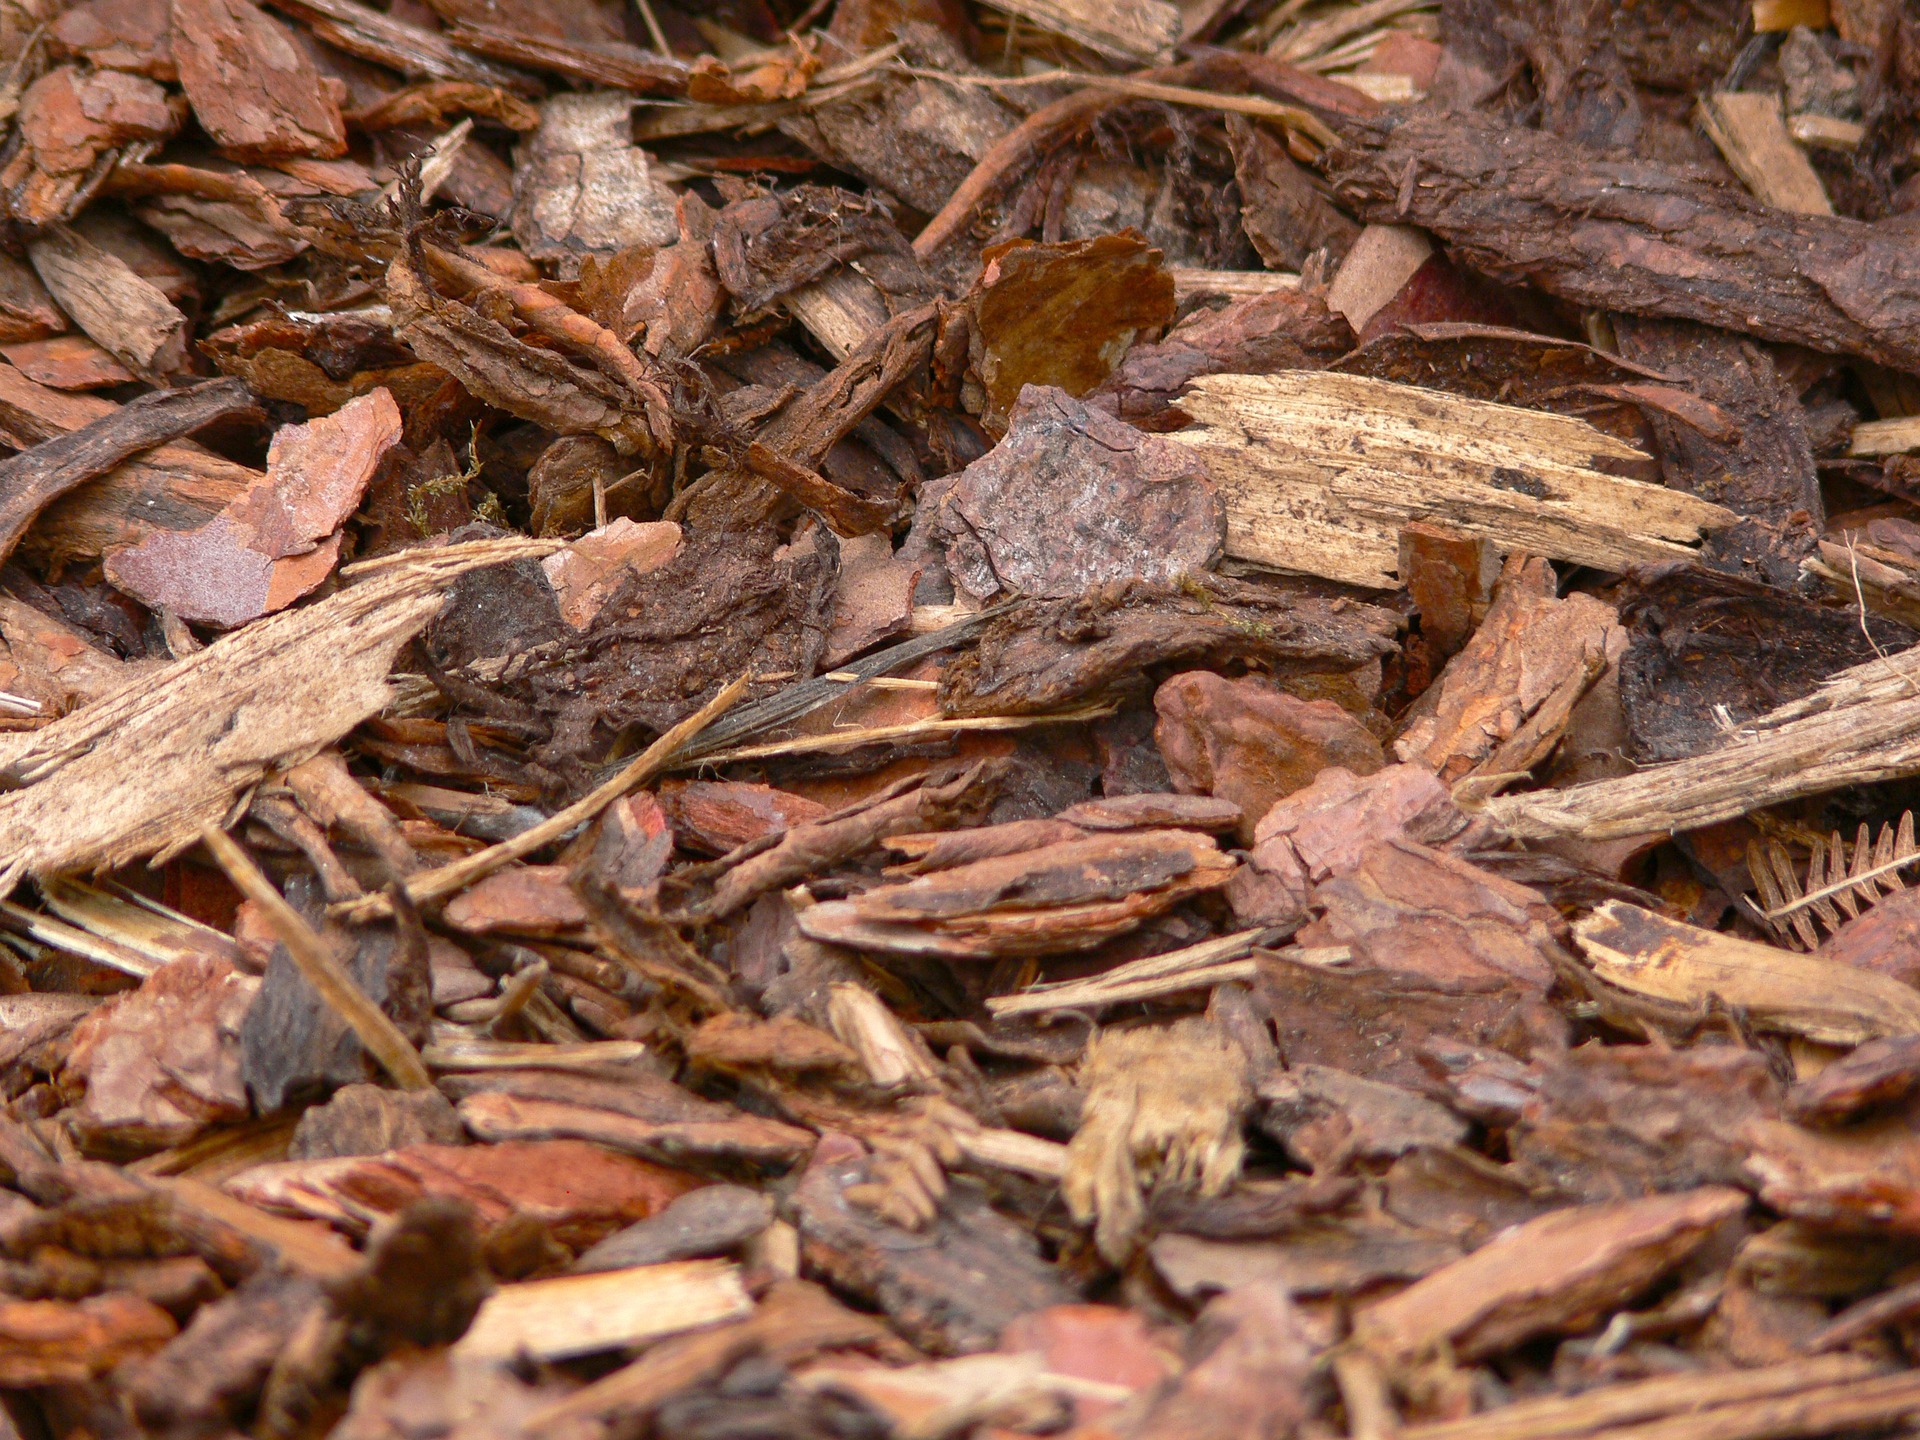 Crucial tree care tips for property owners include how to properly use mulch